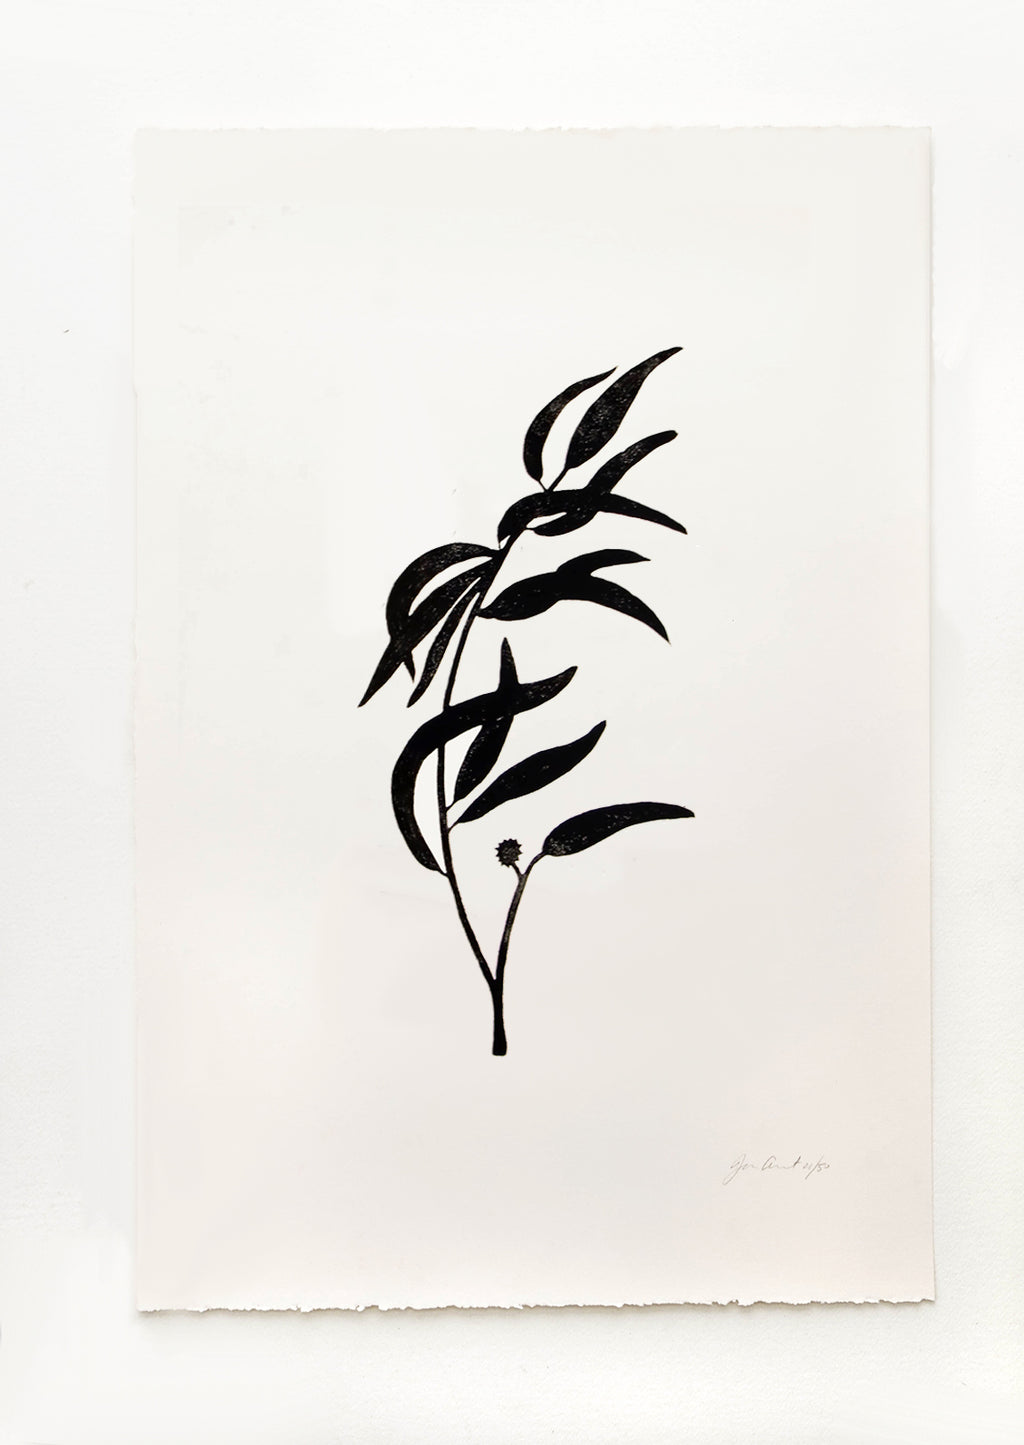 1: Hand printed artwork with off-white background and black silhouette of eucalyptus branch